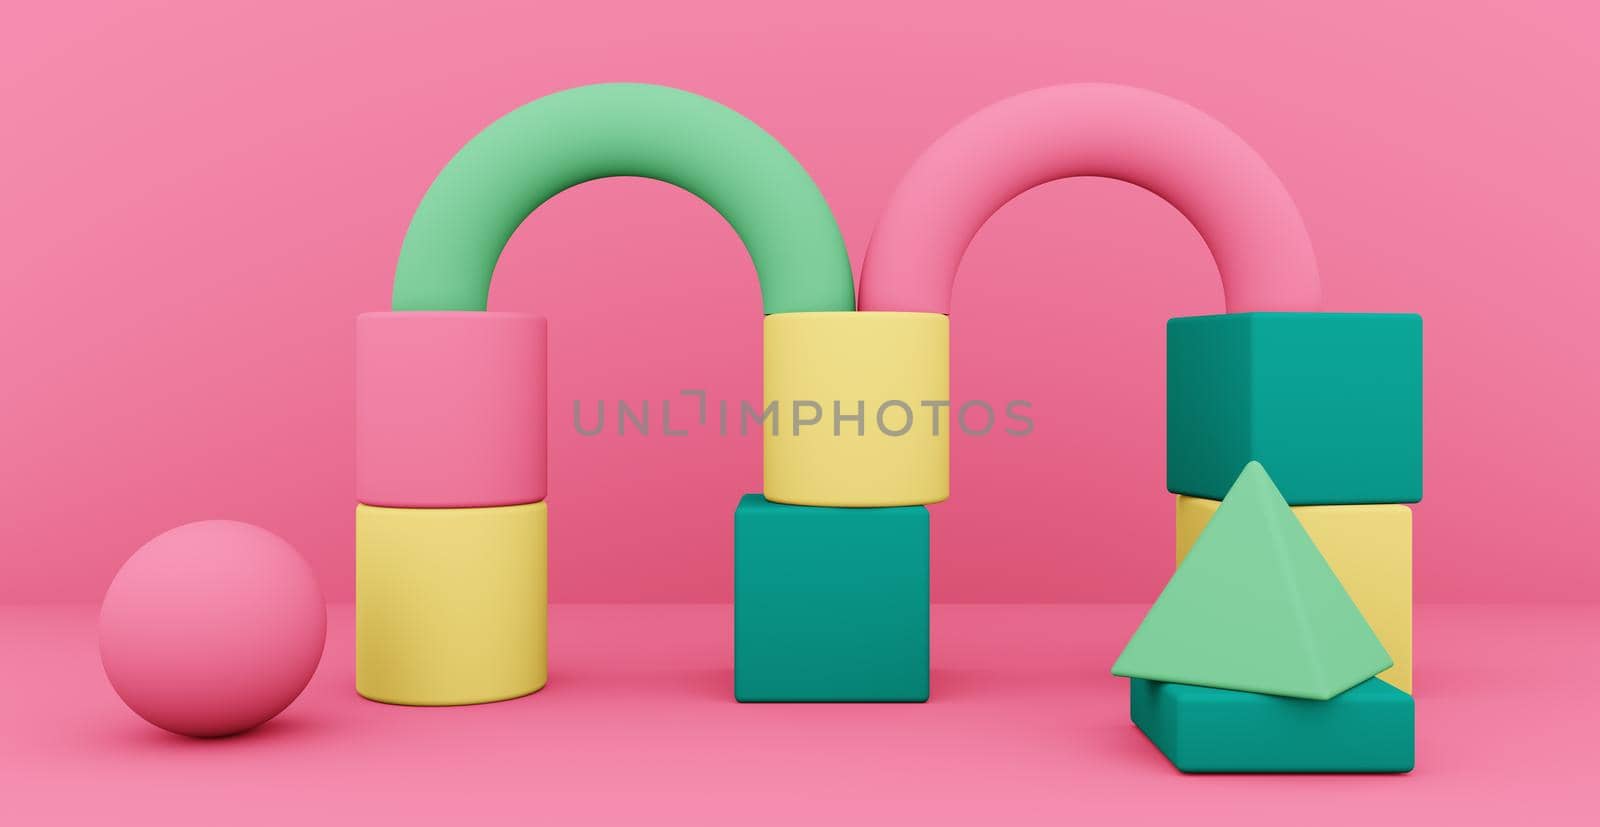 3d rendering of an abstract background with shapes. Composition for product presentation, brand, product advertising. Children's figures.